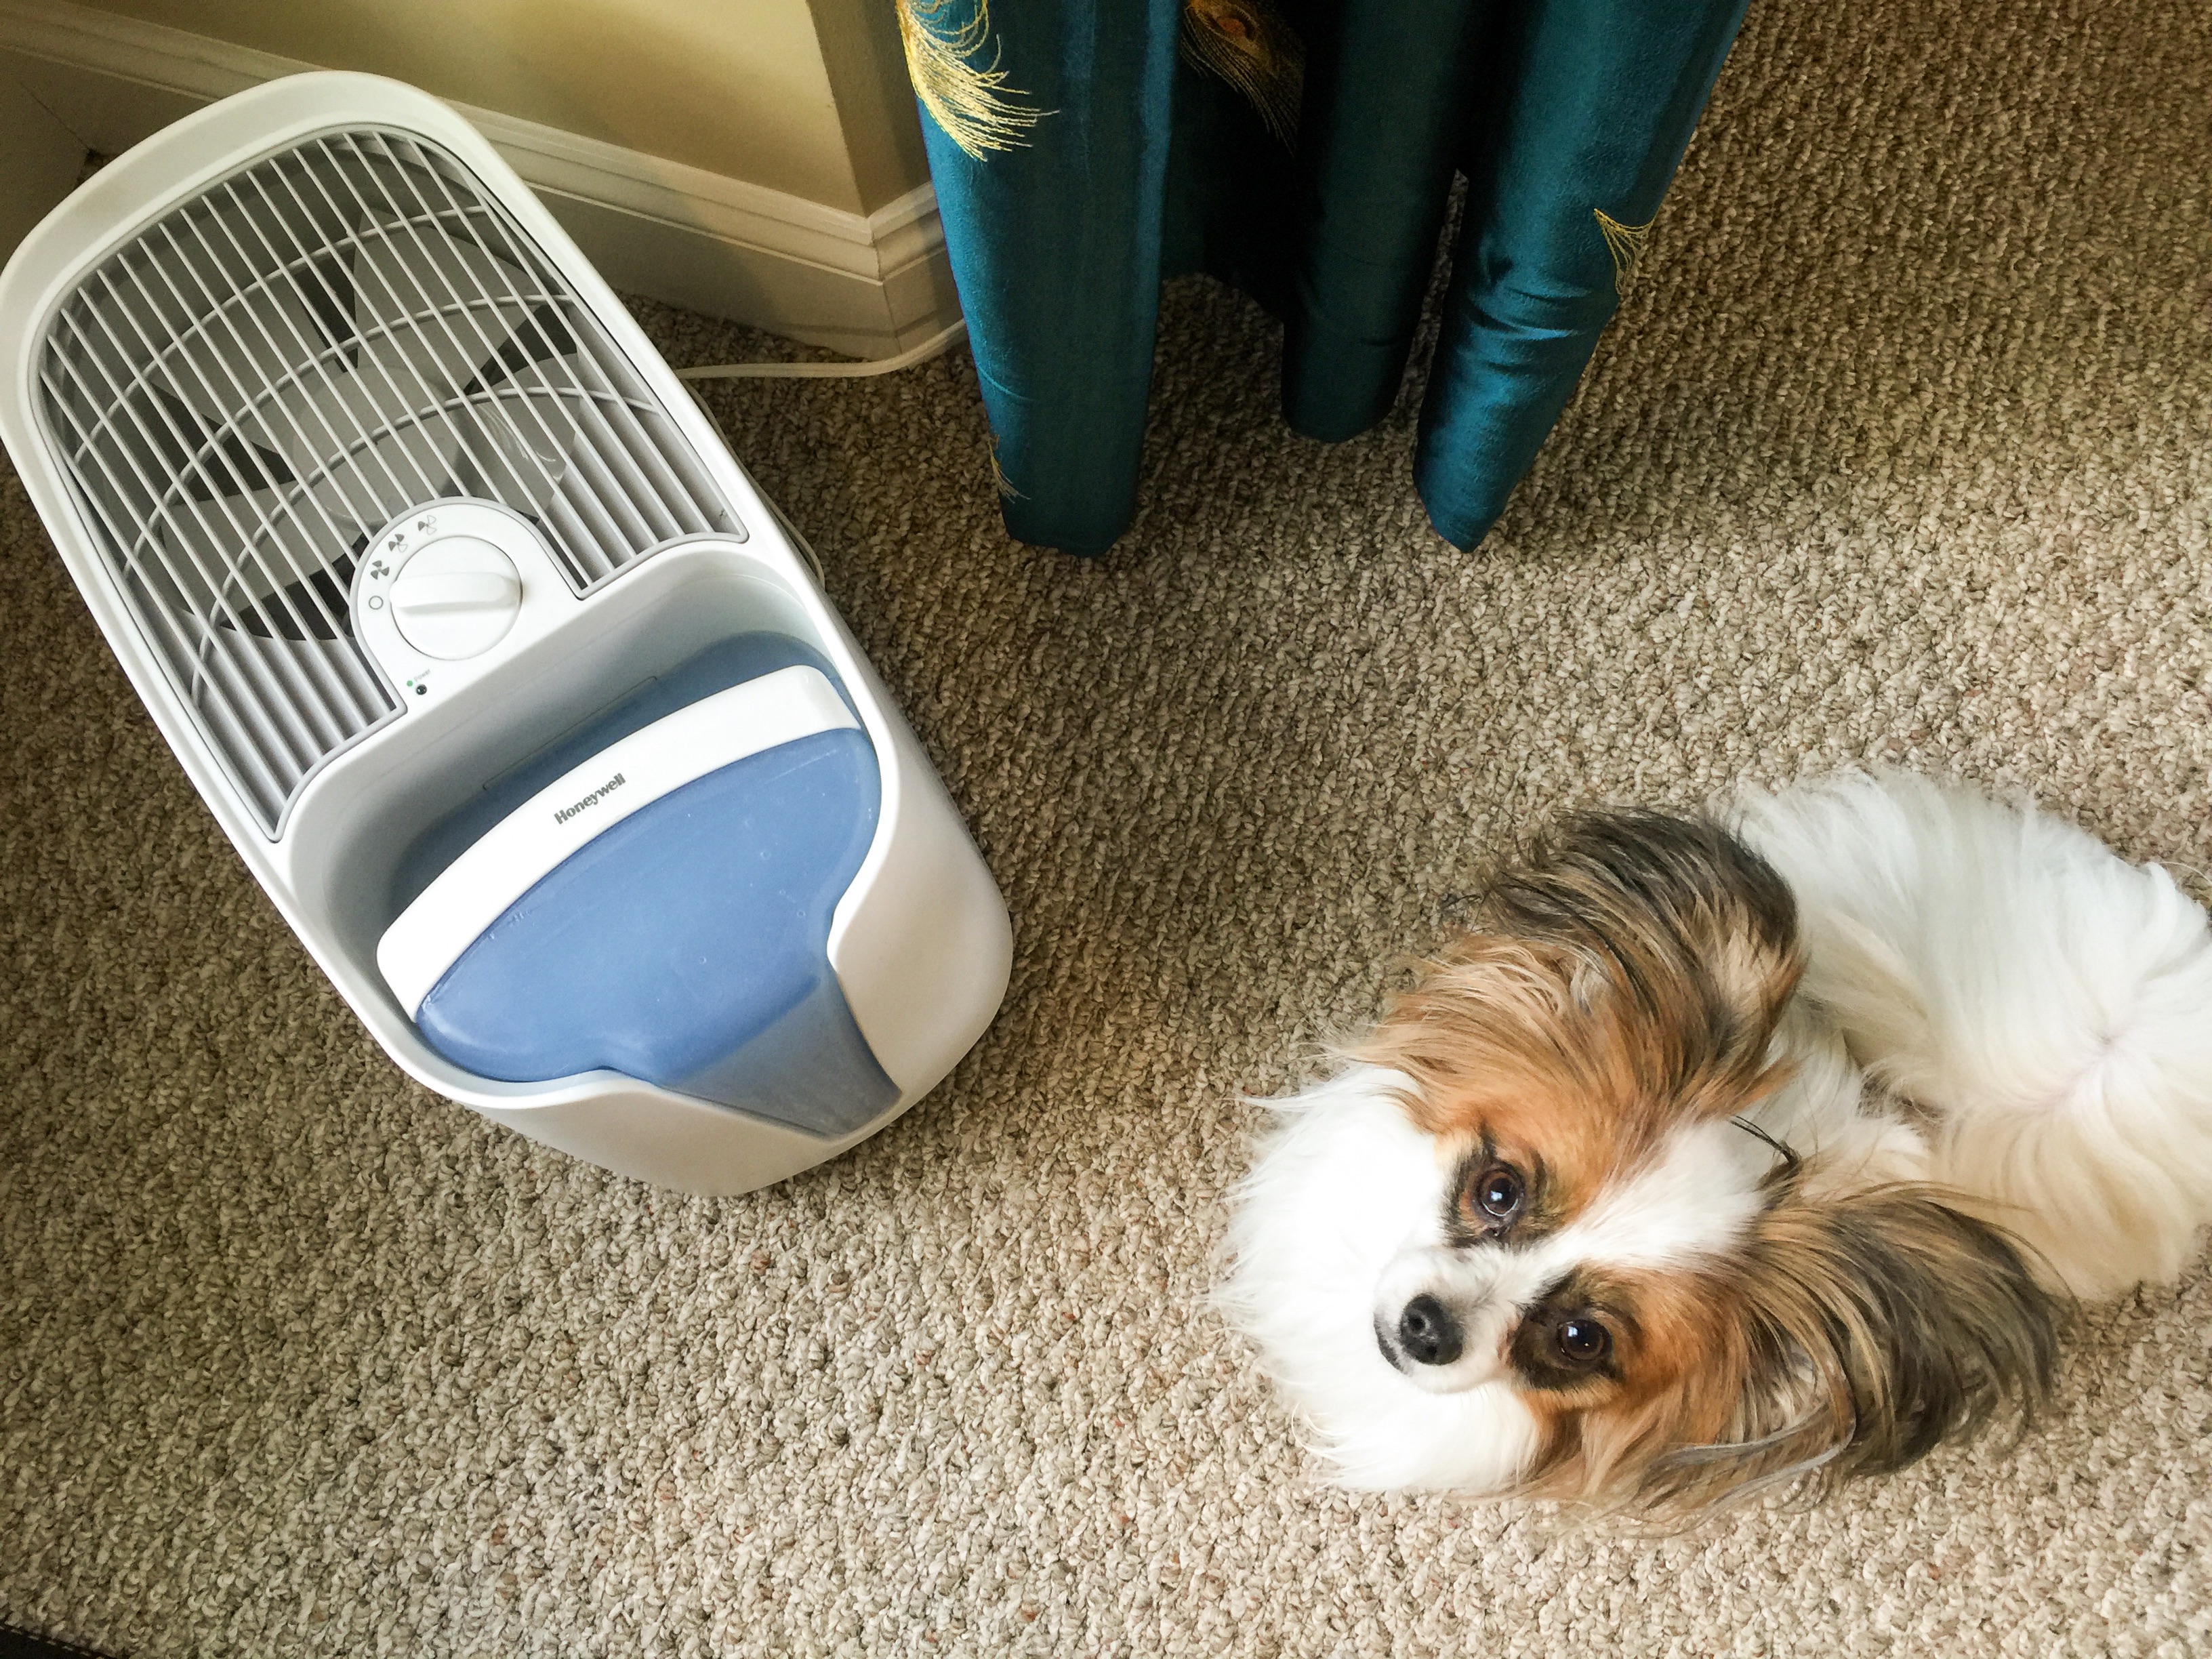 Why I Prefer Honeywell Cool Moisture Humidifiers For My Home + A Giveaway